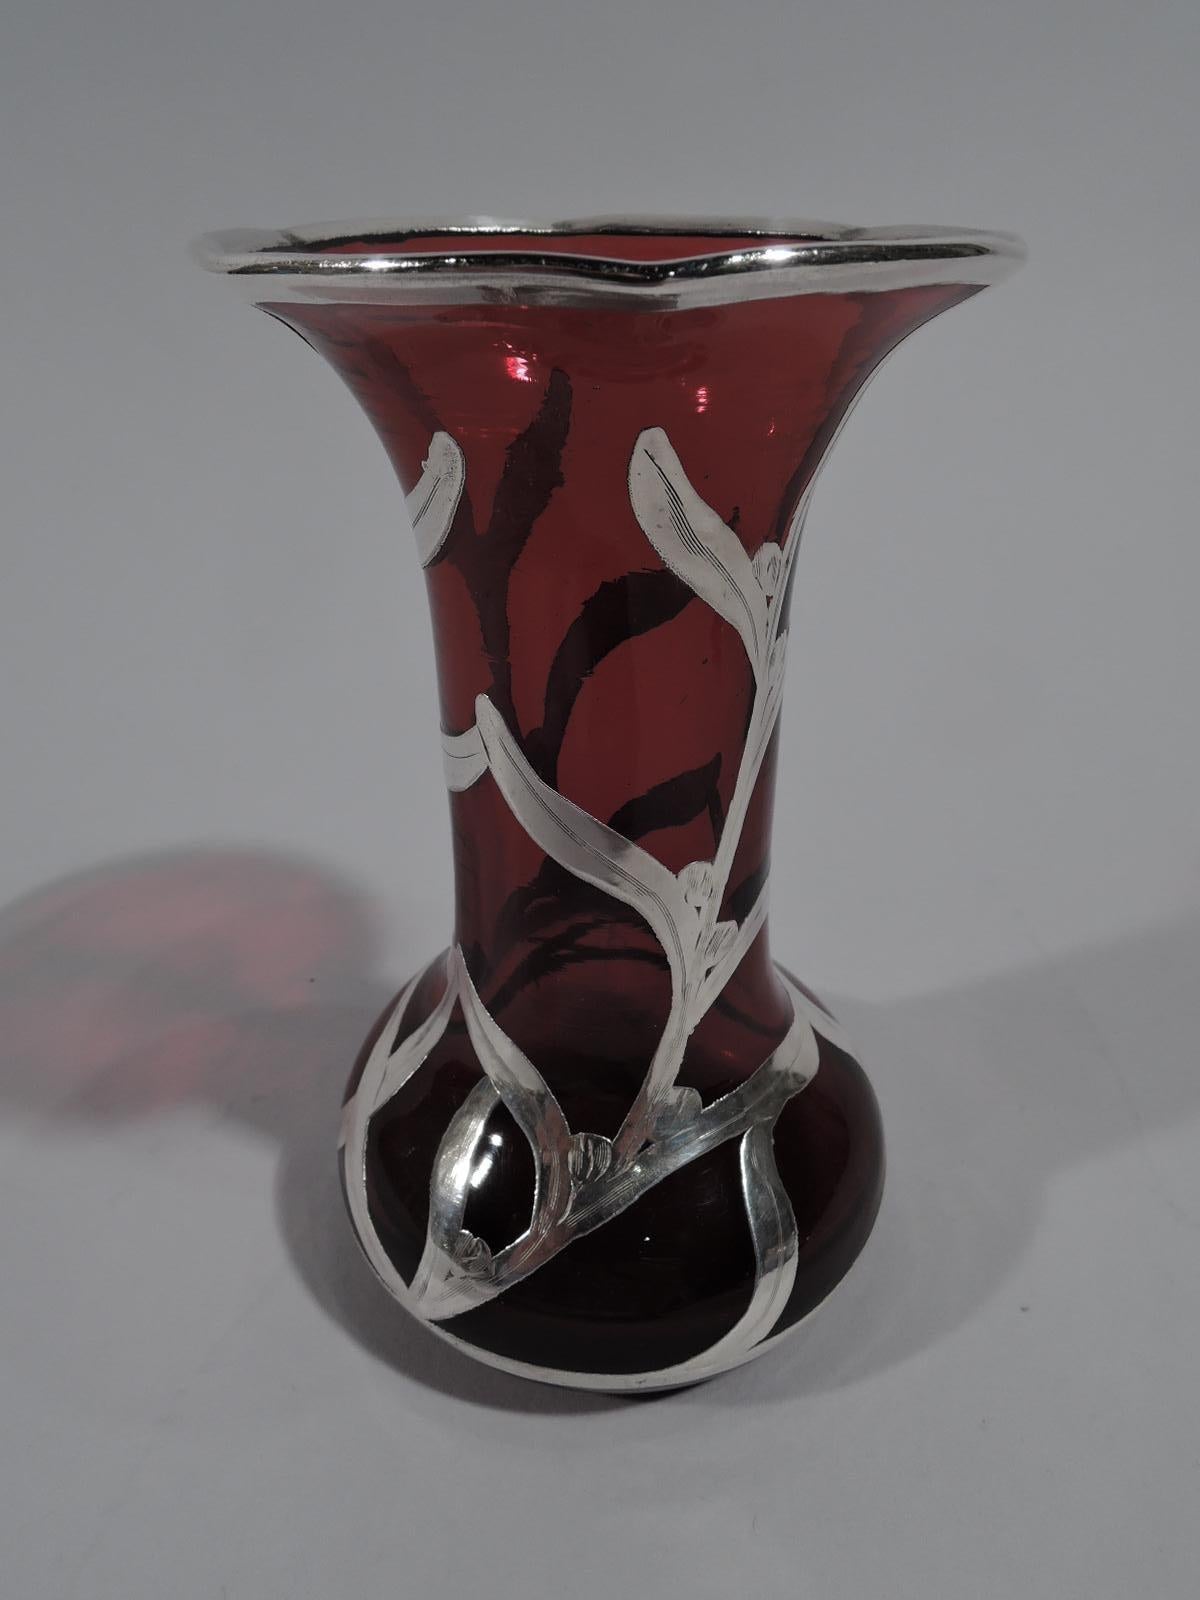 Turn of the century American Art Nouveau glass bud vase with engraved silver overlay. Cylindrical with flared rim and bellied bowl. Semi-abstract overlay in form of budding tendrils. Glass is deep red. Faint mark “Sterling”.